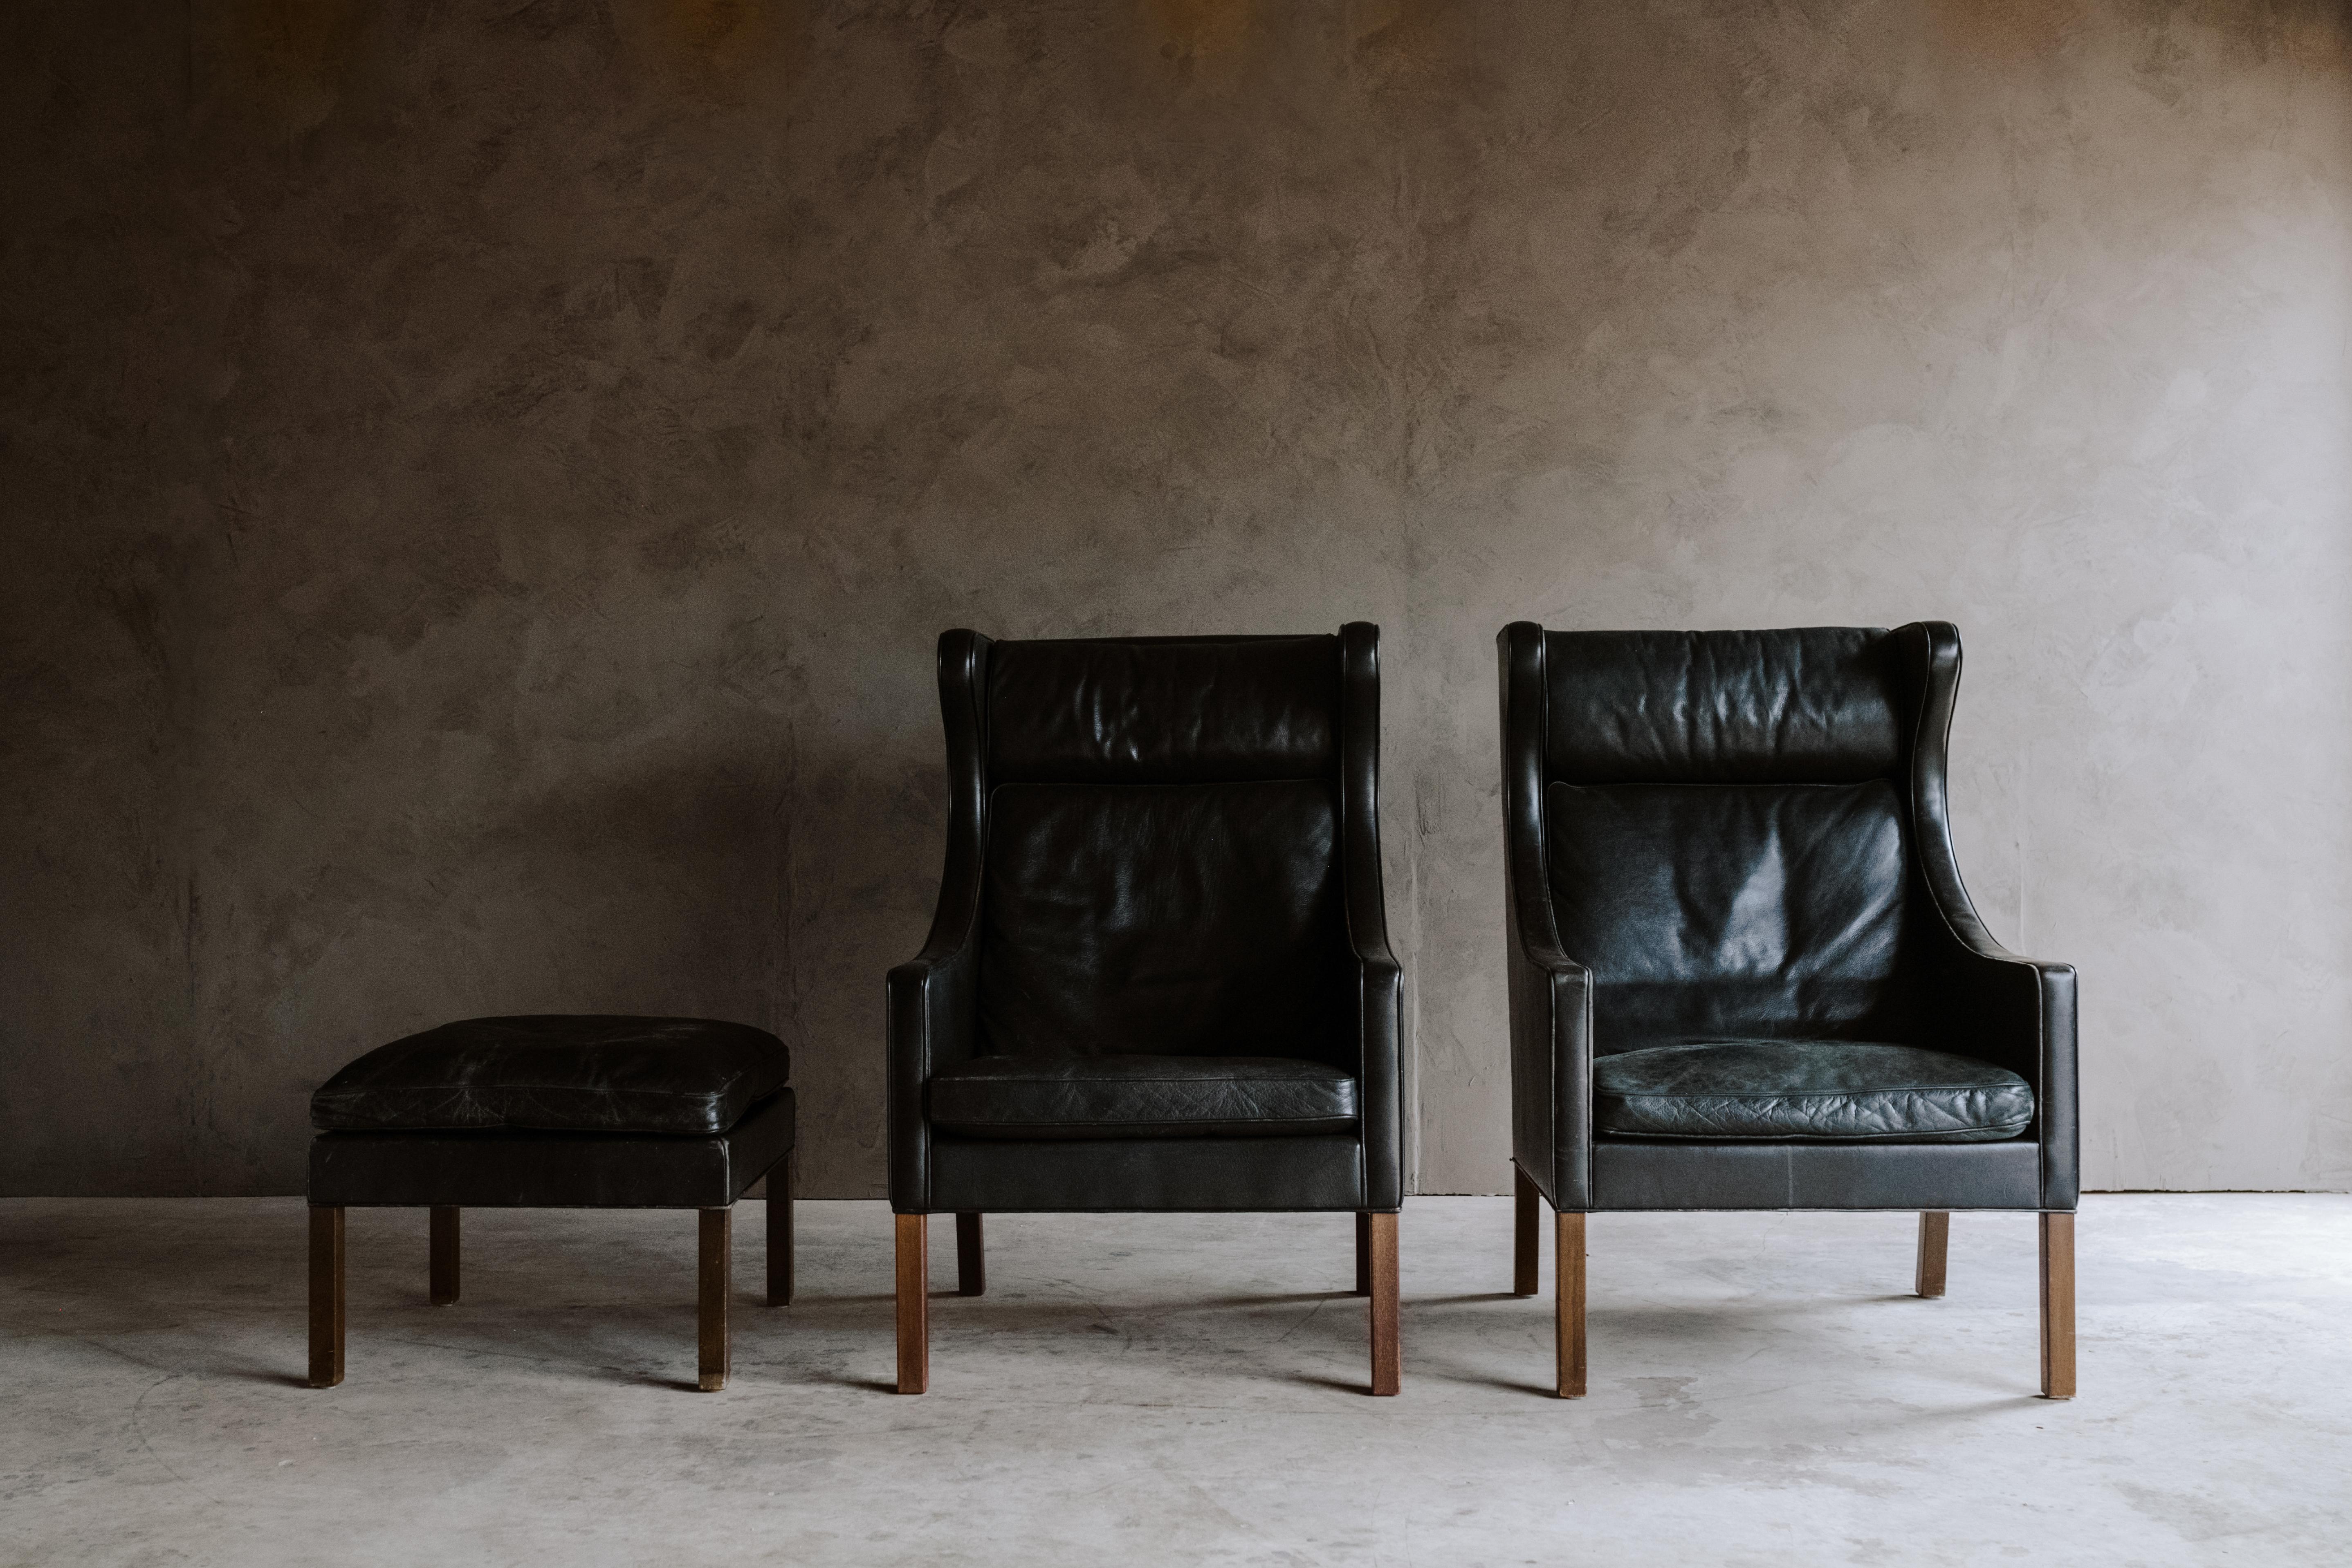 Rare Pair of Børge Mogensen Wingback Chairs, Denmark, 1970s. Original black leather upholstery with solid teak legs. 

One ottoman included. Measures: H 18, W 22, D 22.